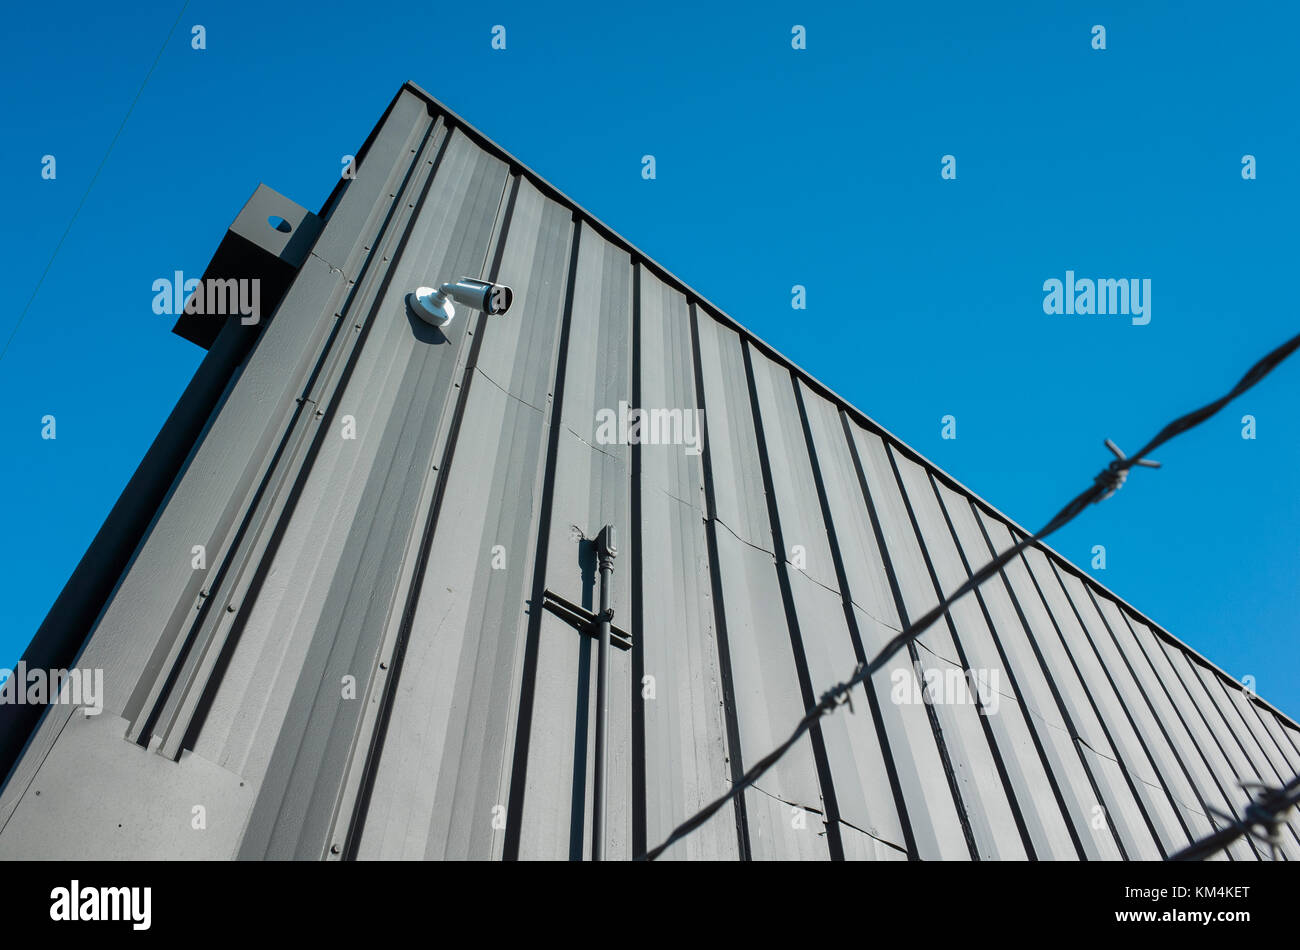 Low angle view of building exterior with surveillance camera, barbed wire in foreground. Stock Photo